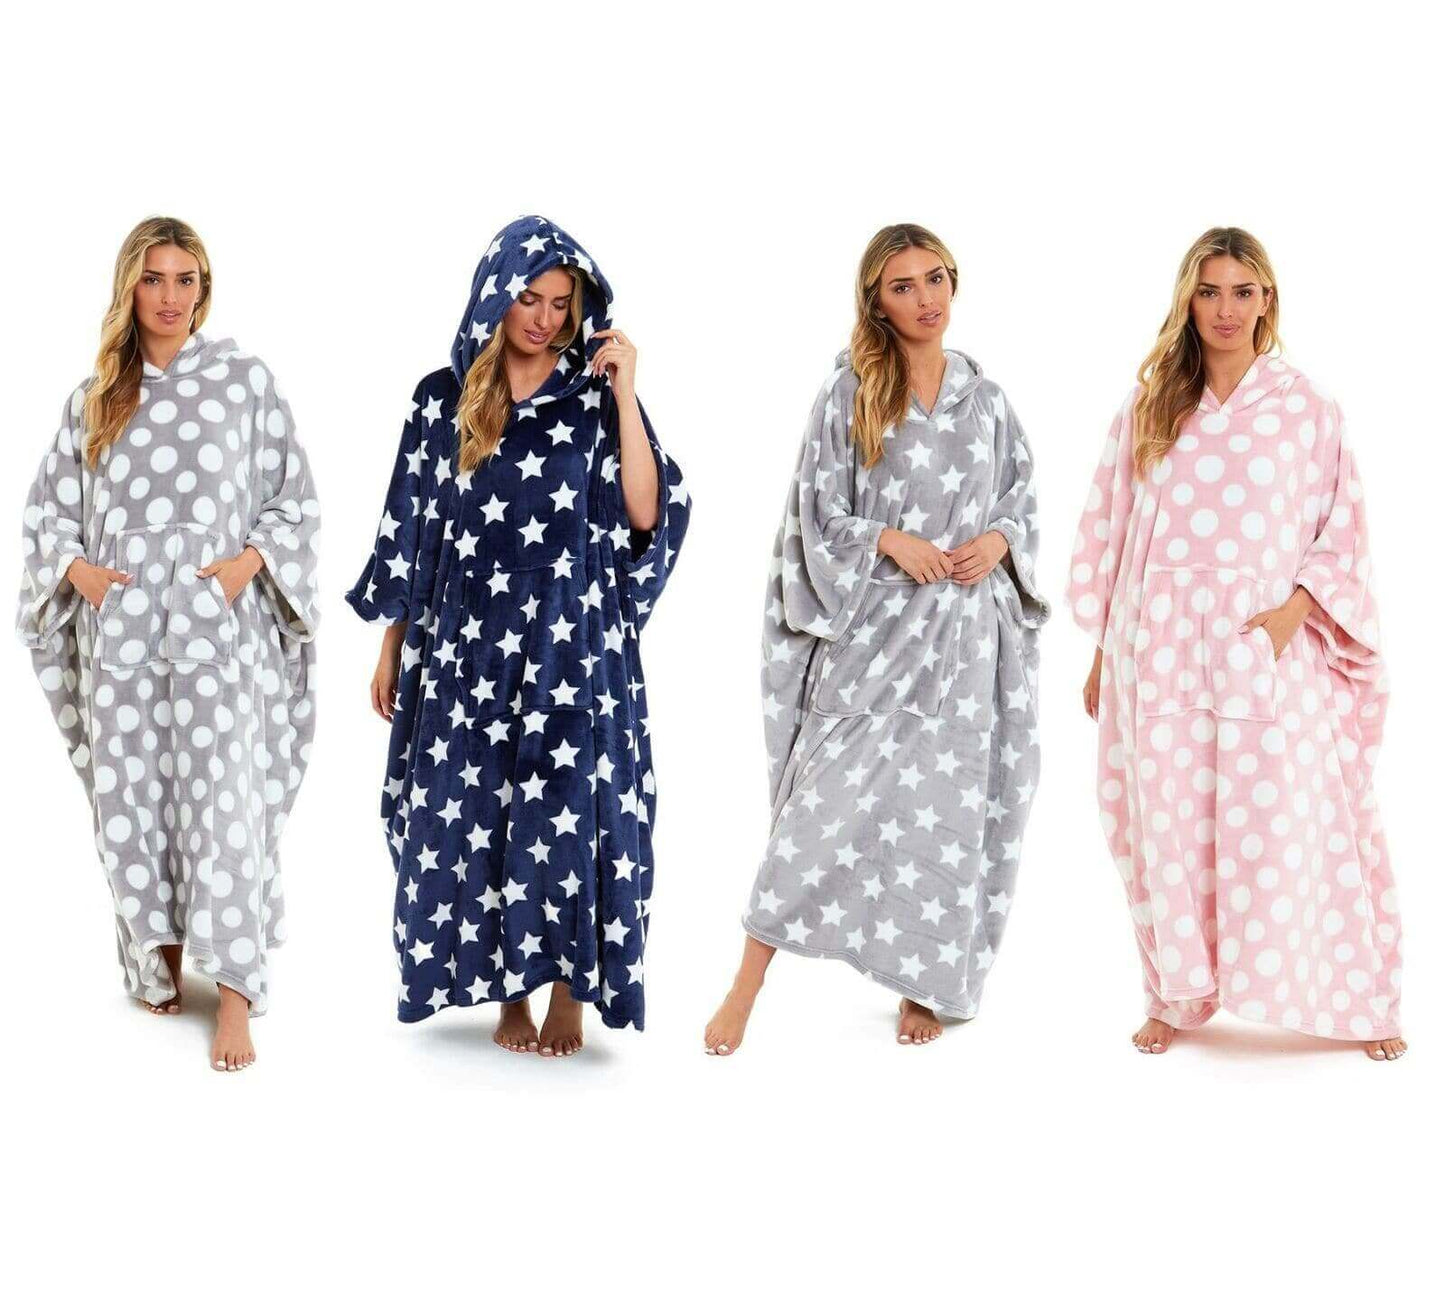 Women's Oversized Hooded Poncho Blanket, Stars & Polka Dot. Buy now for £25.00. A Hooded Blanket by Daisy Dreamer. blue, blush pink, charcoal, circles, clothing, dusky pink, faux fur, flannel, fleece, grey, hooded blanket, hot pink, loungewear, navy, nigh